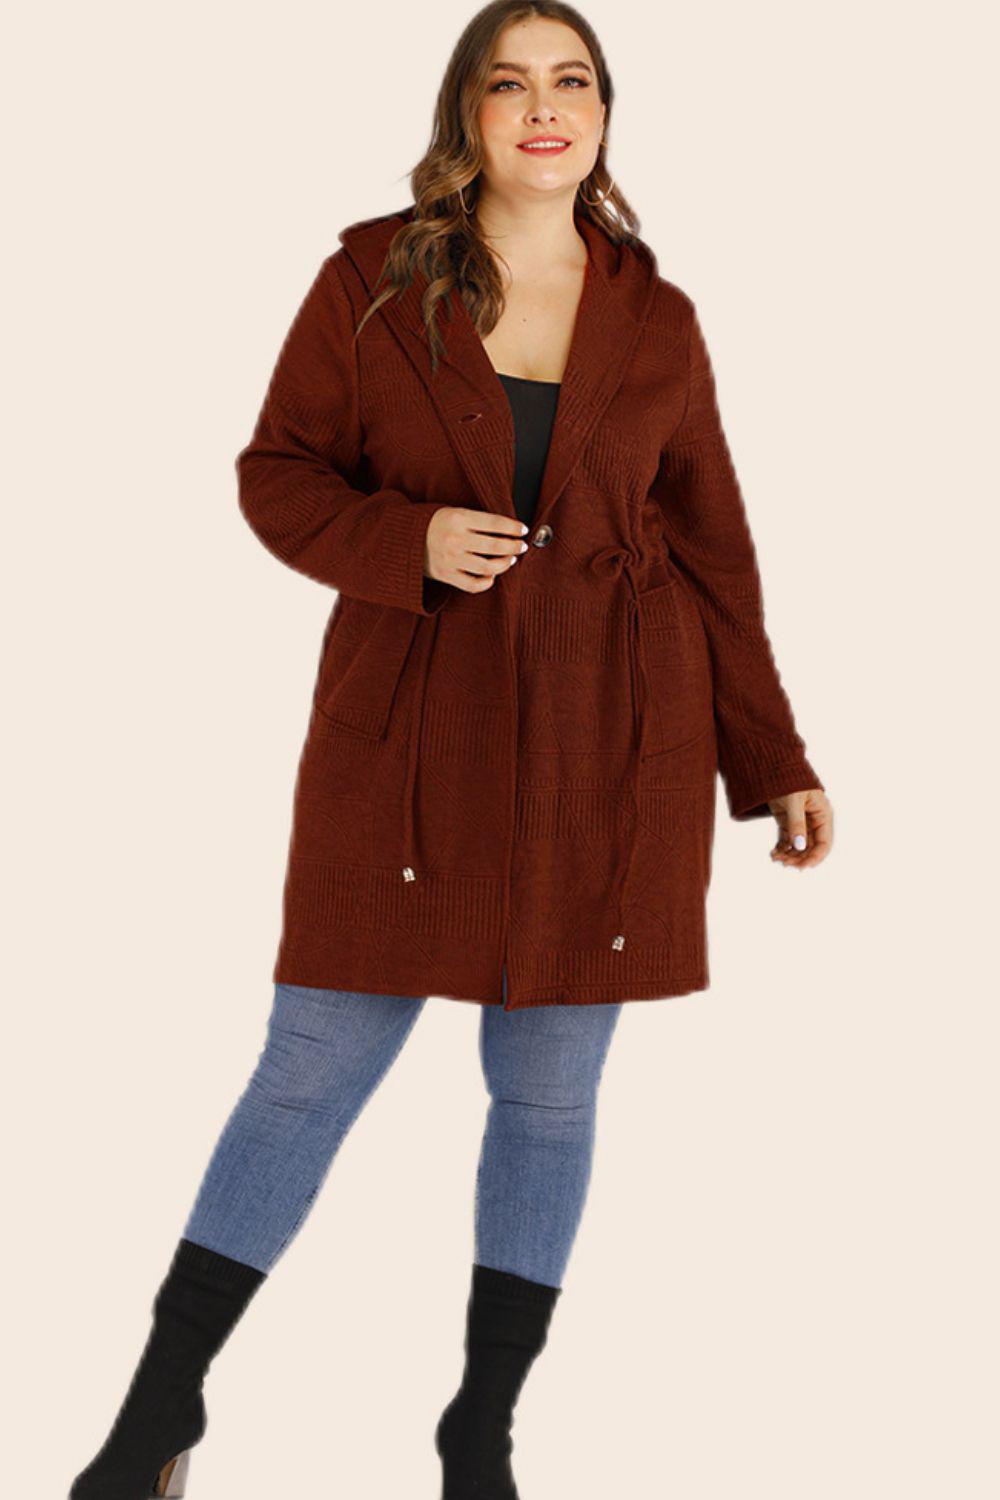 Plus Size Drawstring Waist Hooded Cardigan with Pockets BLUE ZONE PLANET